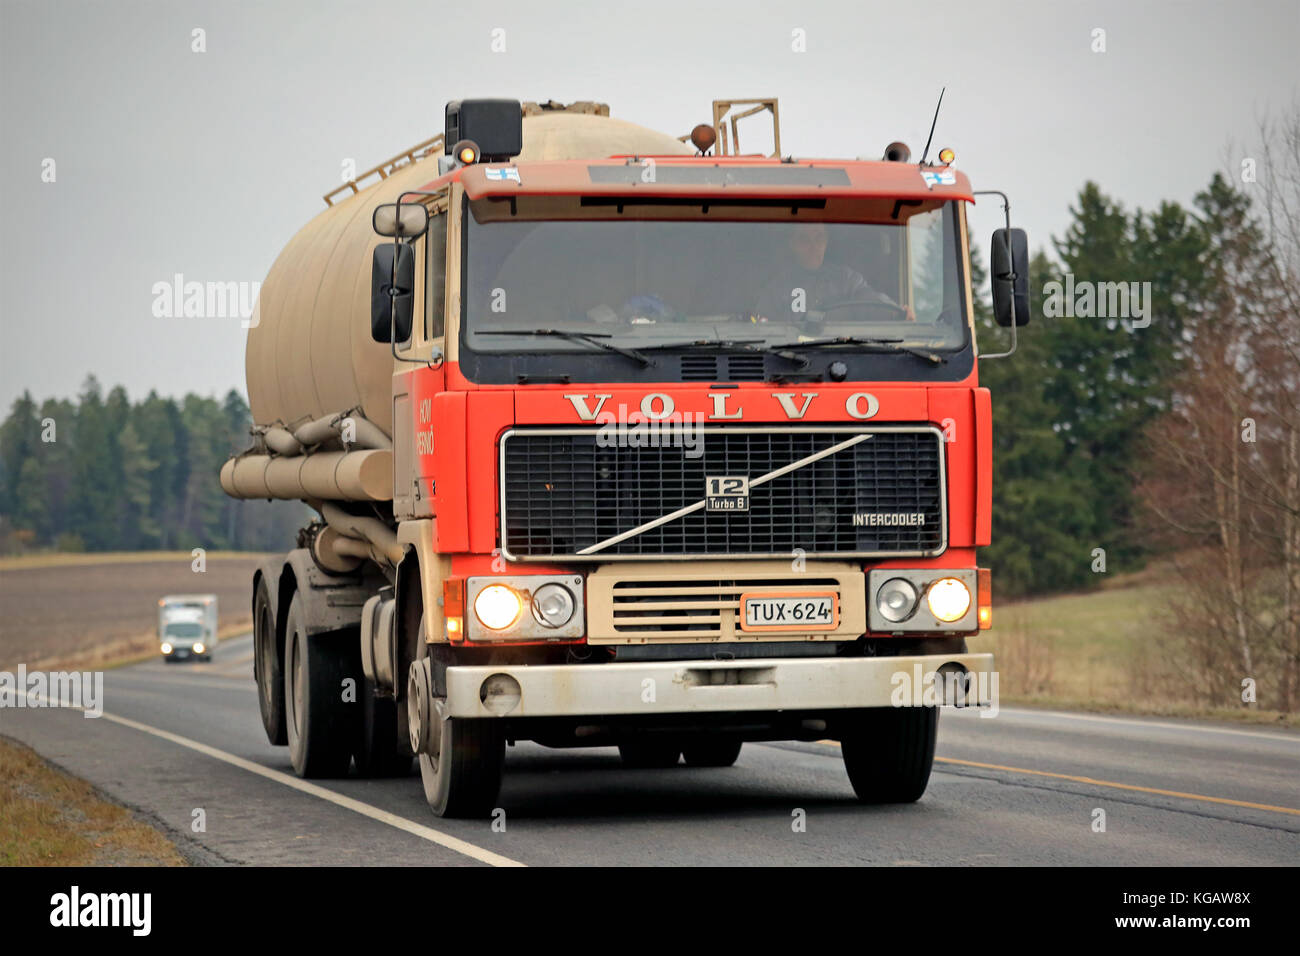 SALO, FINLAND - NOVEMBER 7, 2015: Early Volvo F12 tank truck on the road. Volvo f12 belongs to the F series manufactured by Volvo Trucks between 1977  Stock Photo